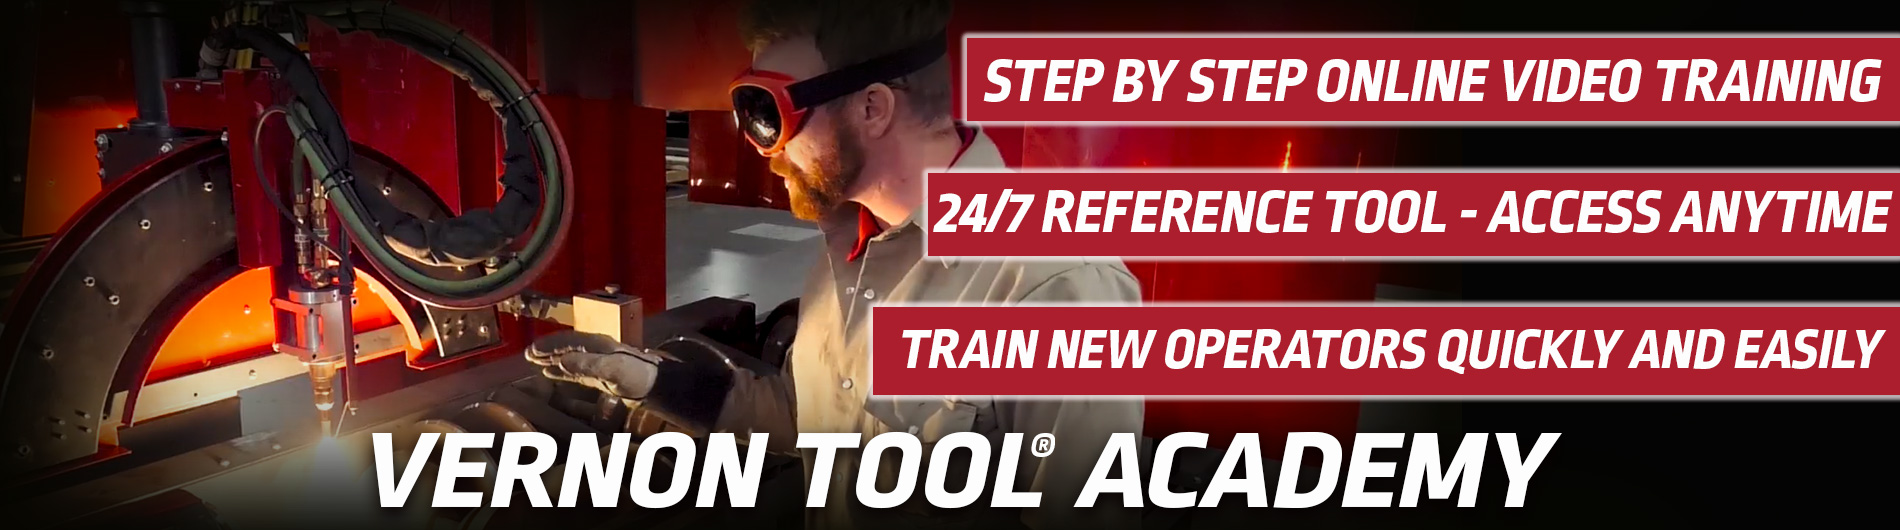 Vernon Tool Academy - 24/7 Online Virtual Video Training for the Vernon Tool Machines